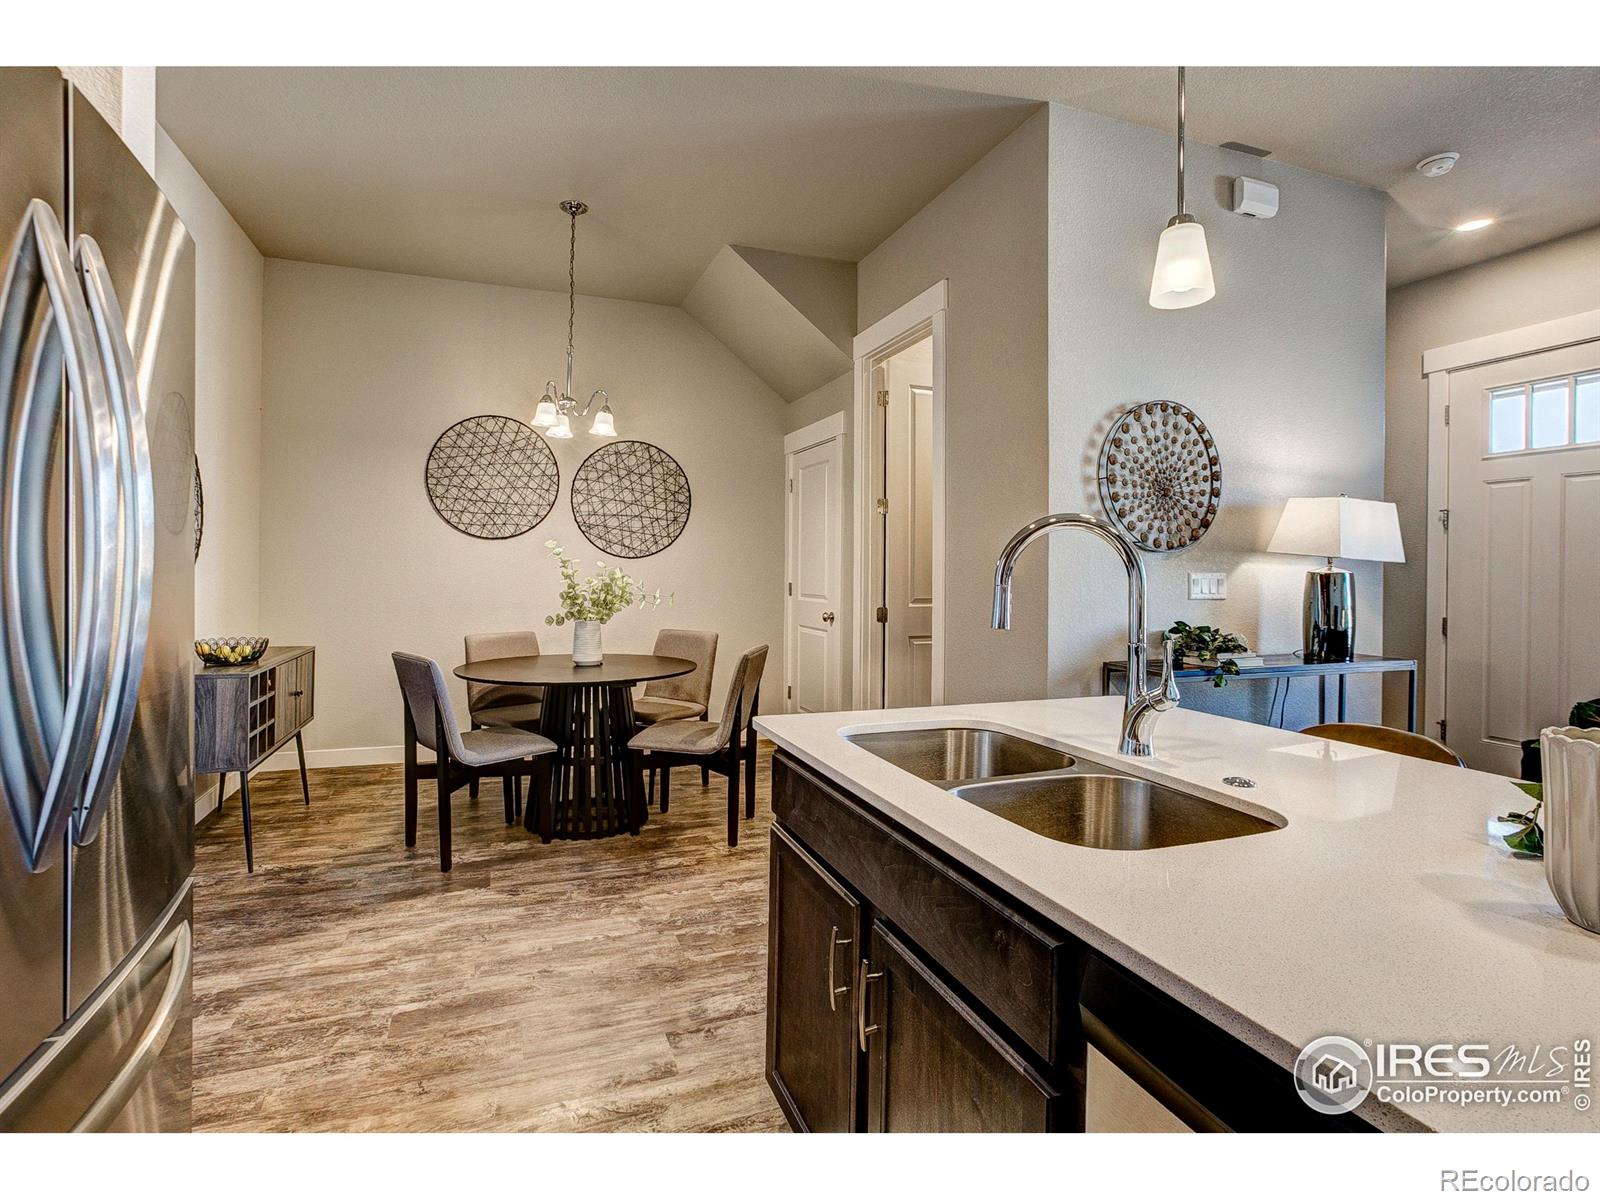 Report Image for 3484  Grayling Drive,Loveland, Colorado